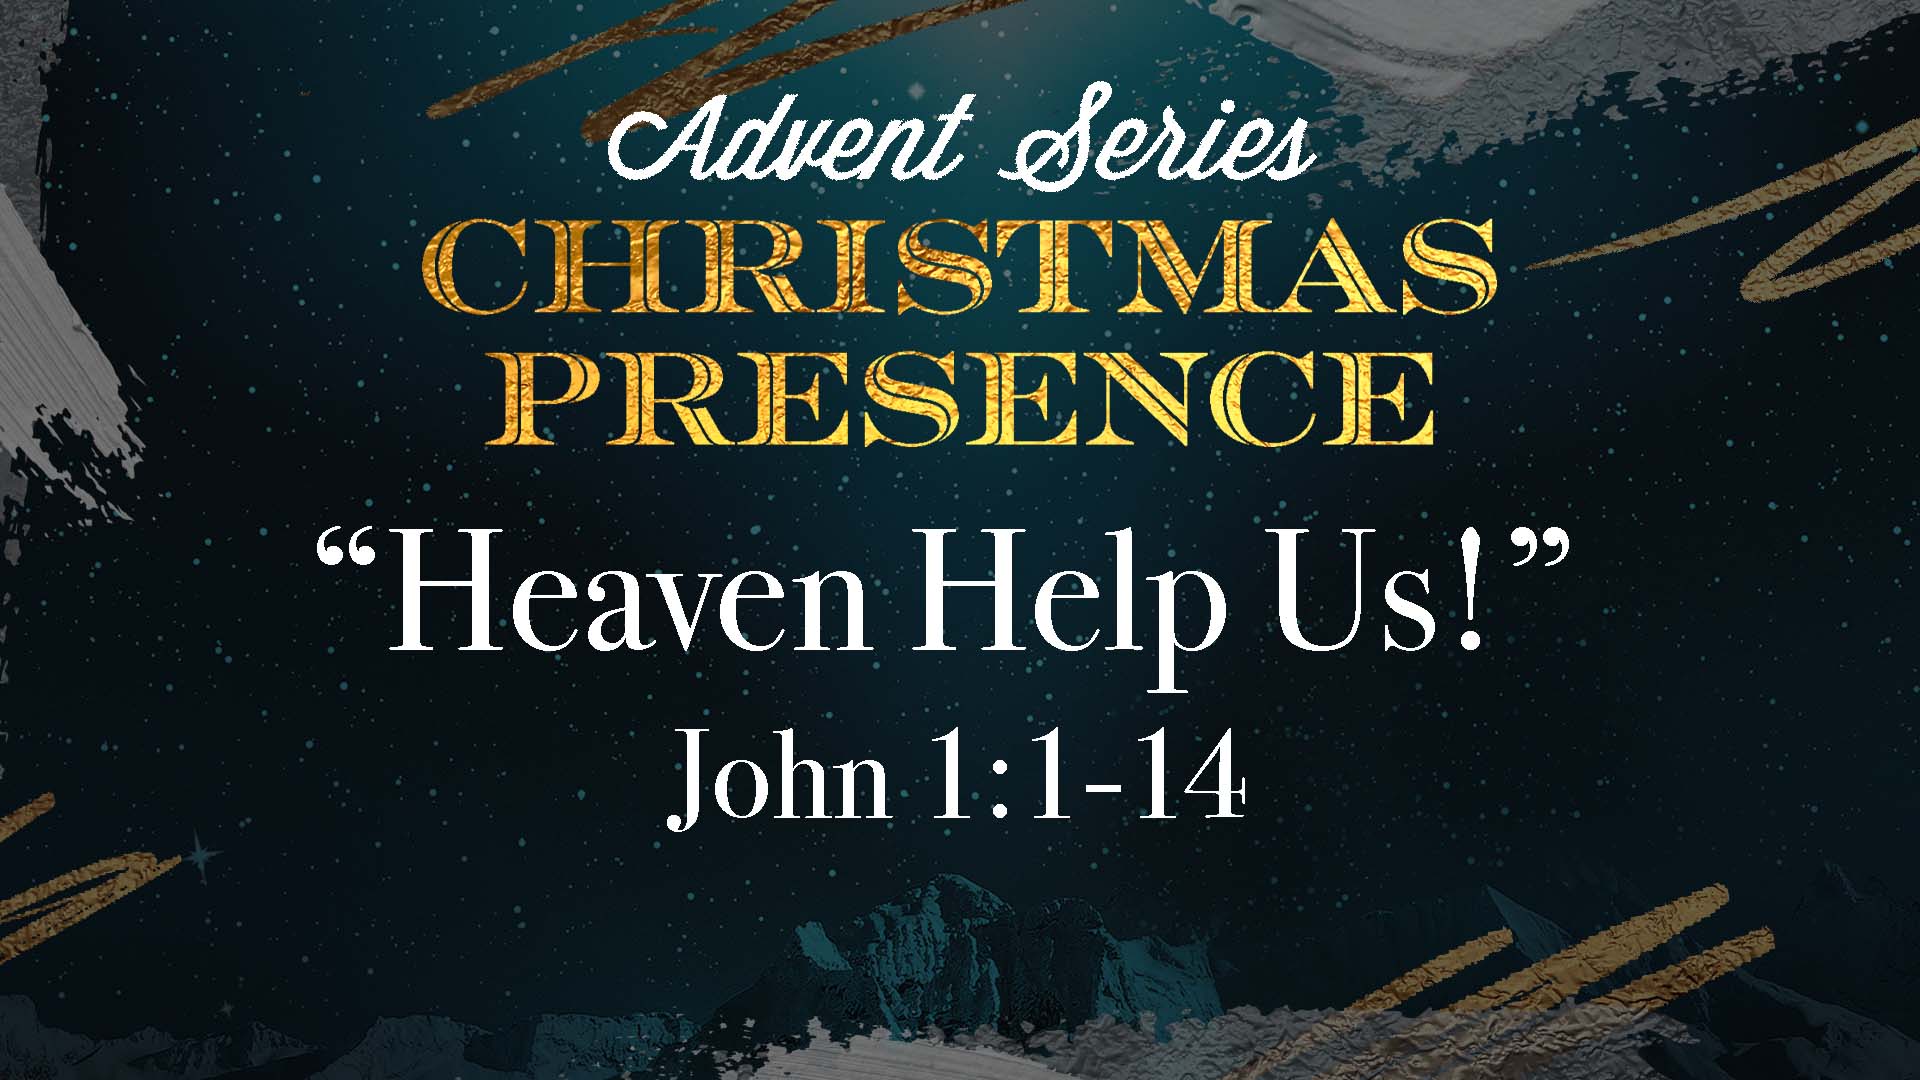 Advent Series: Christmas Presence Part 5 “Heaven Help Us!” (Traditional)